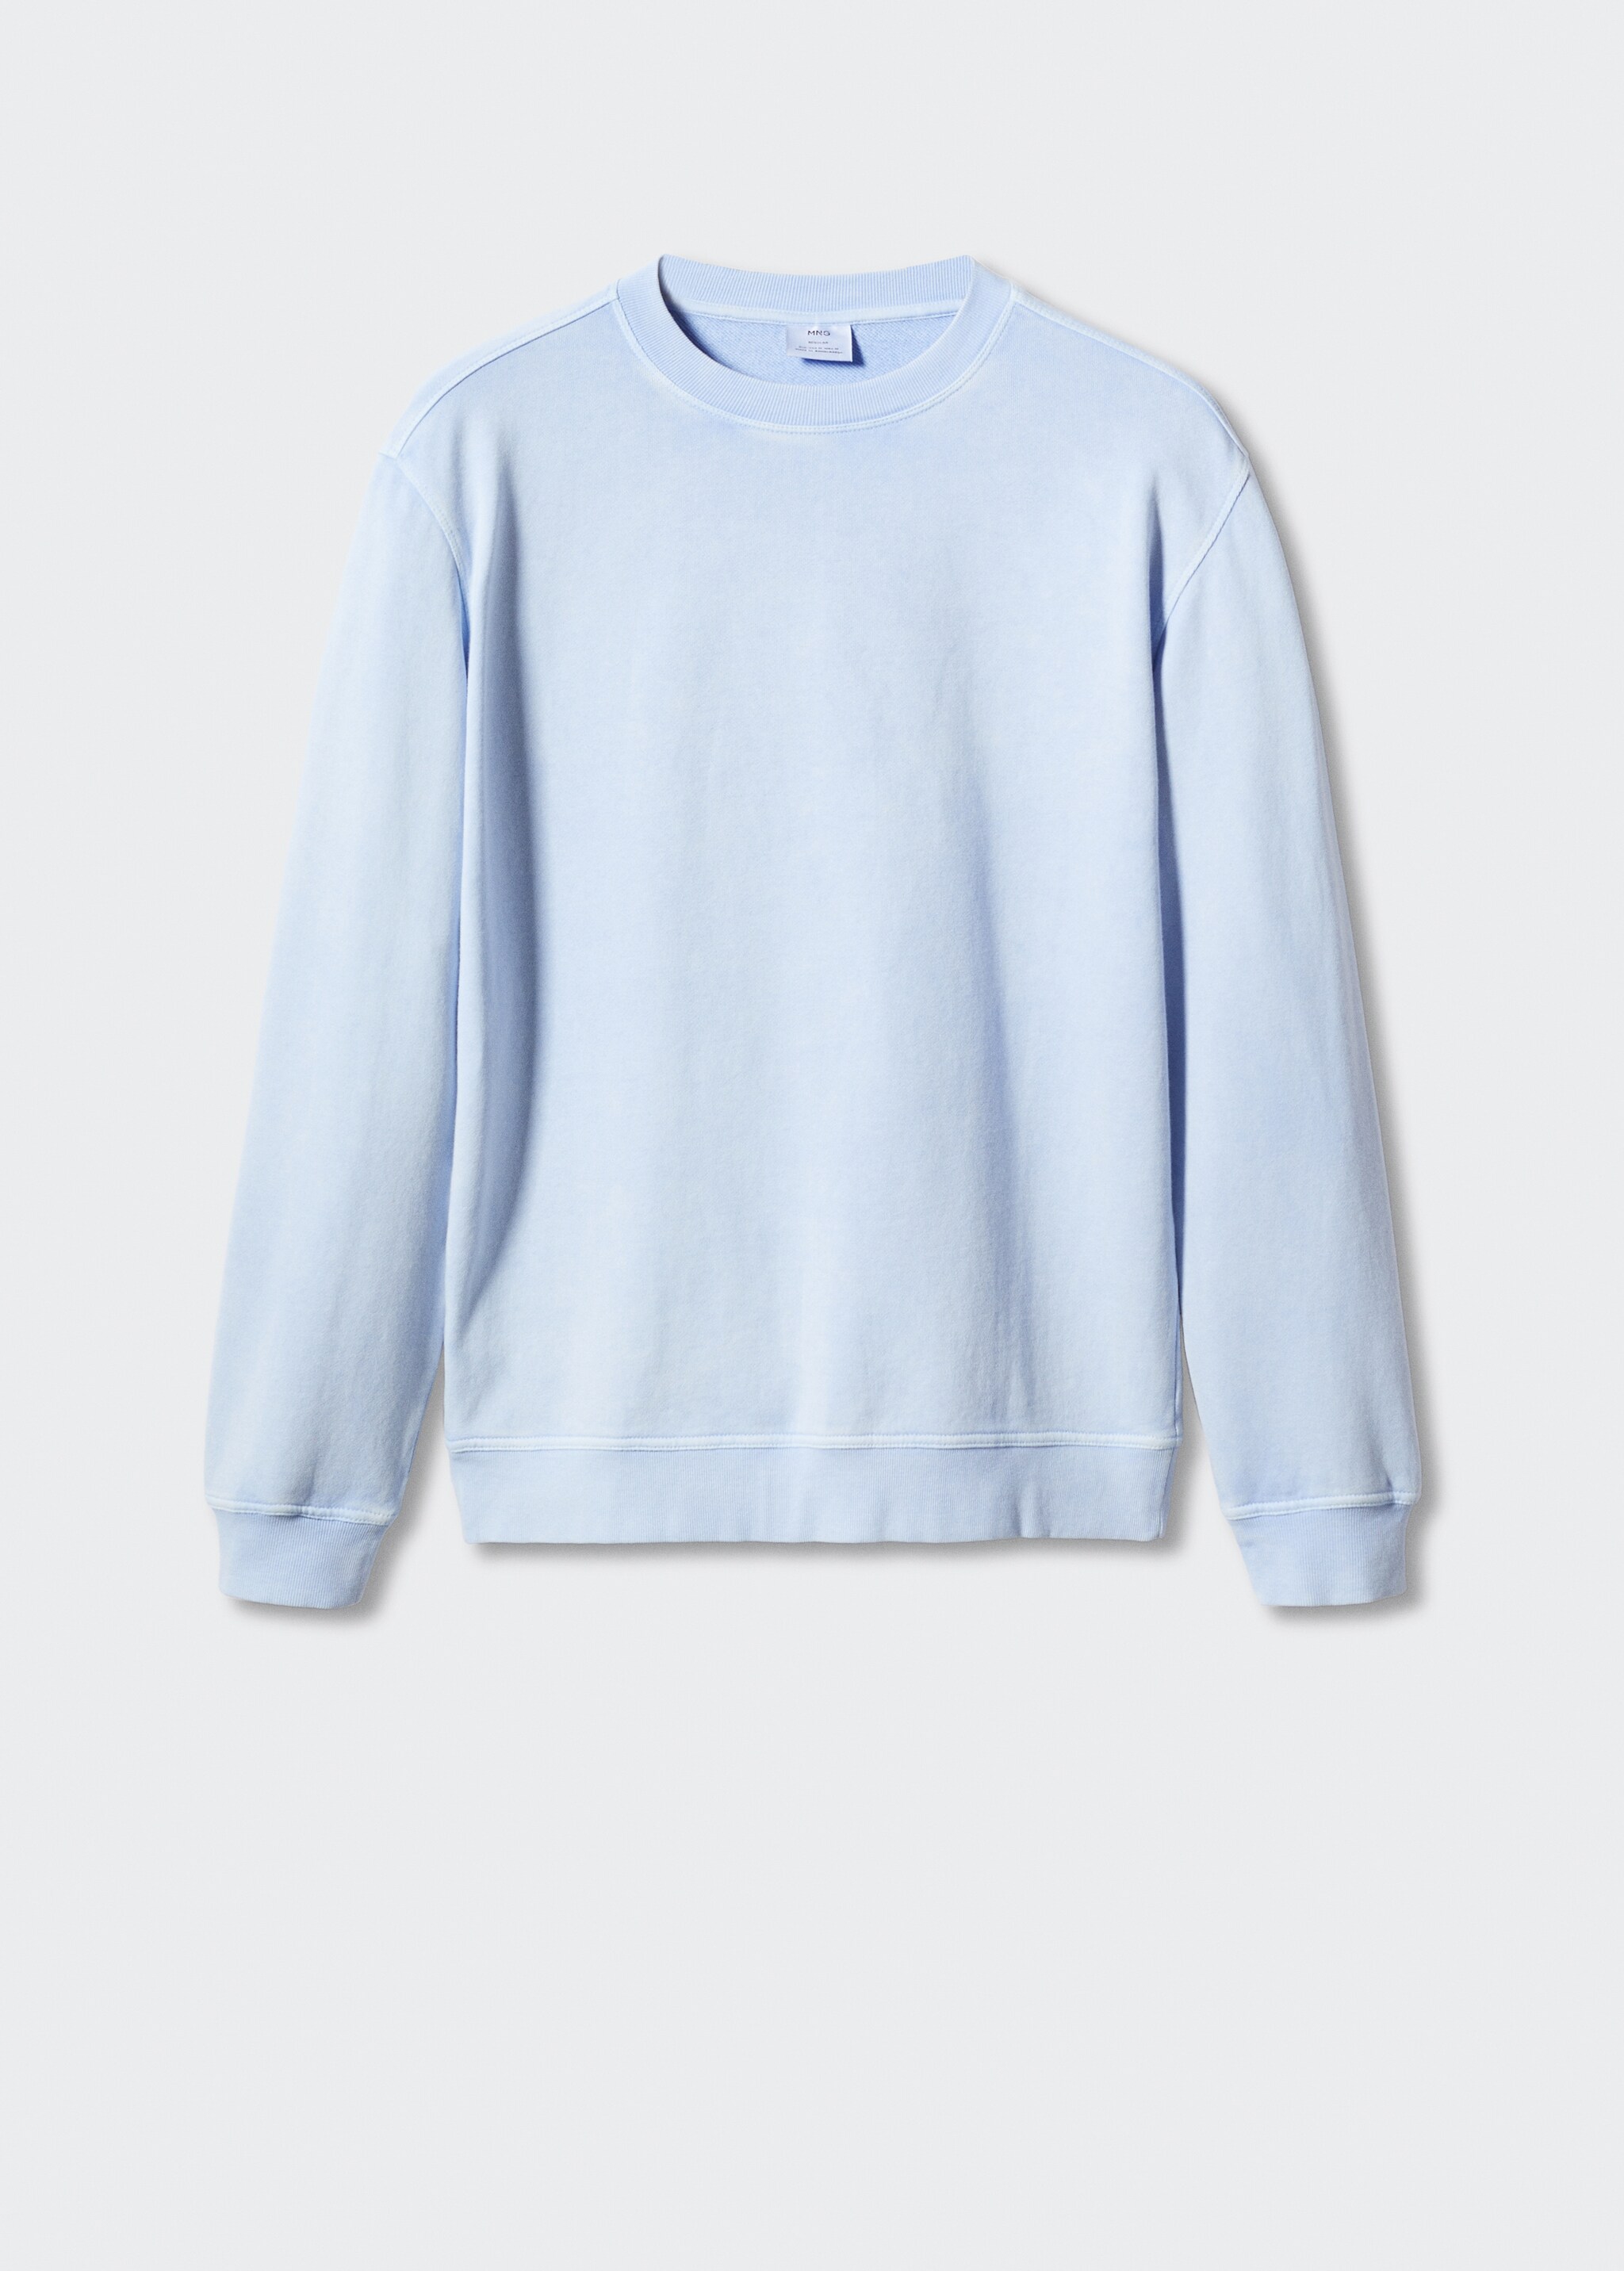 Dyed cotton sweatshirt - Article without model